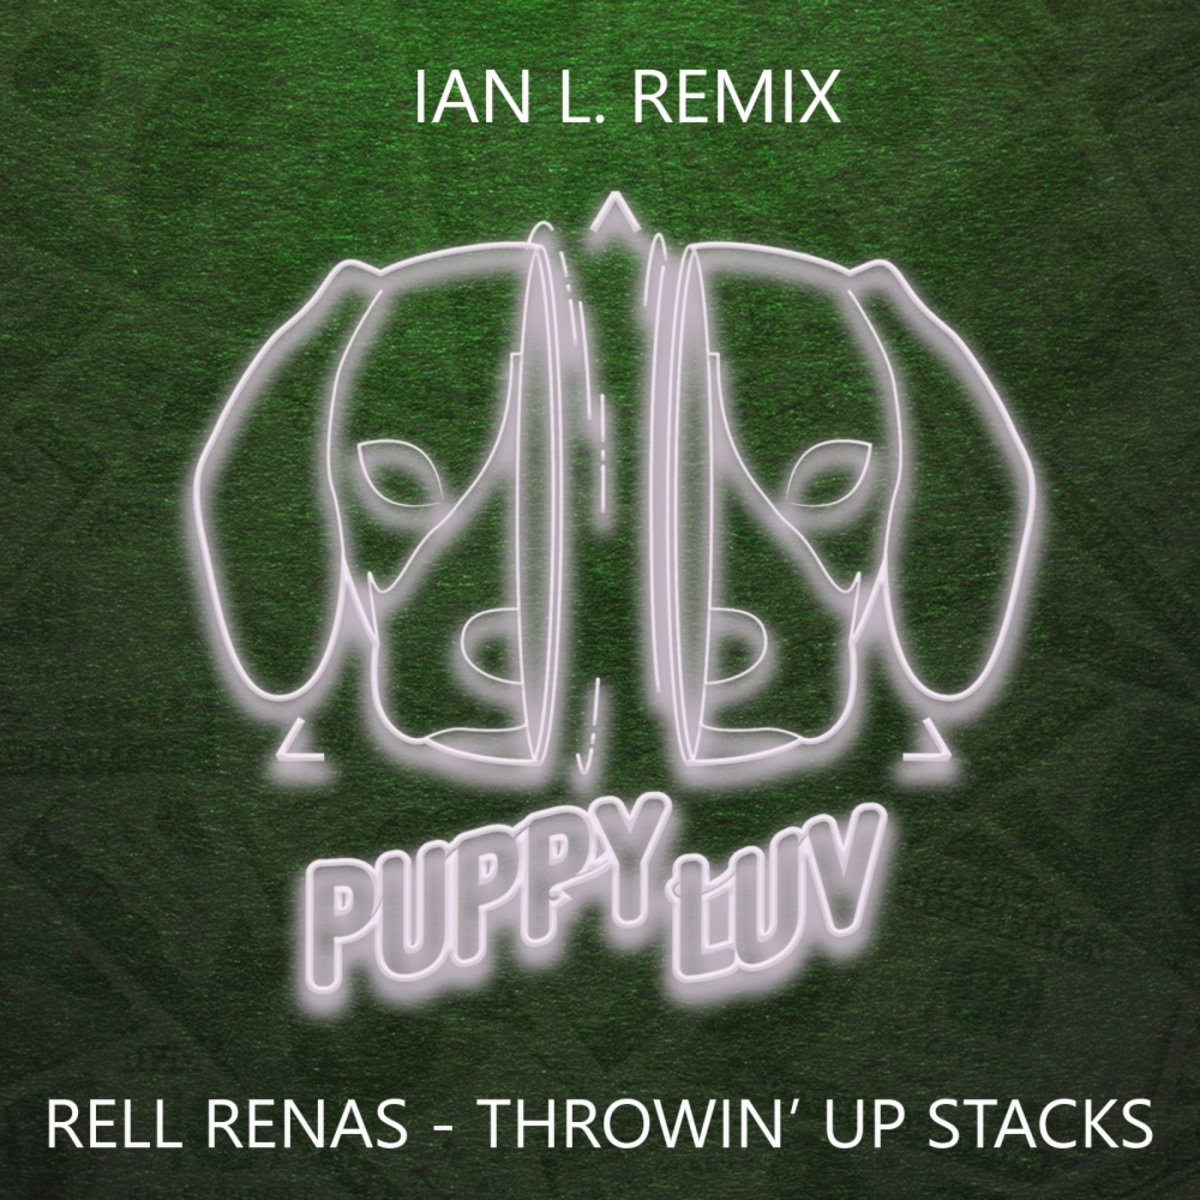 Rell Renas - Throwin' Up Stacks (Ian L. Remix) / Puppy Luv Records